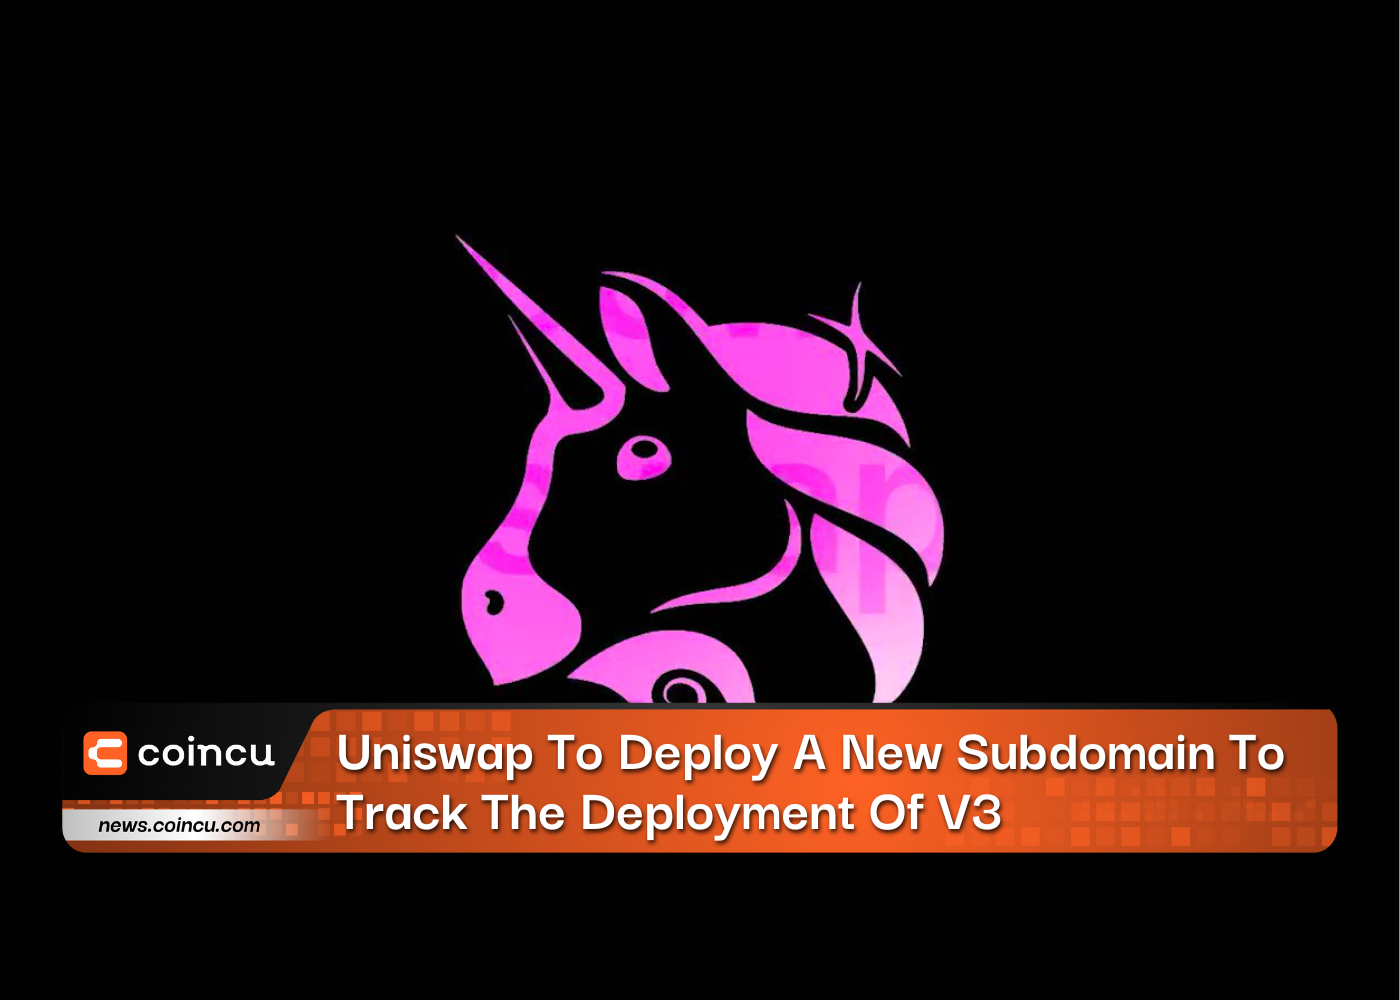 Uniswap To Deploy A New Subdomain To Track The Deployment Of V3